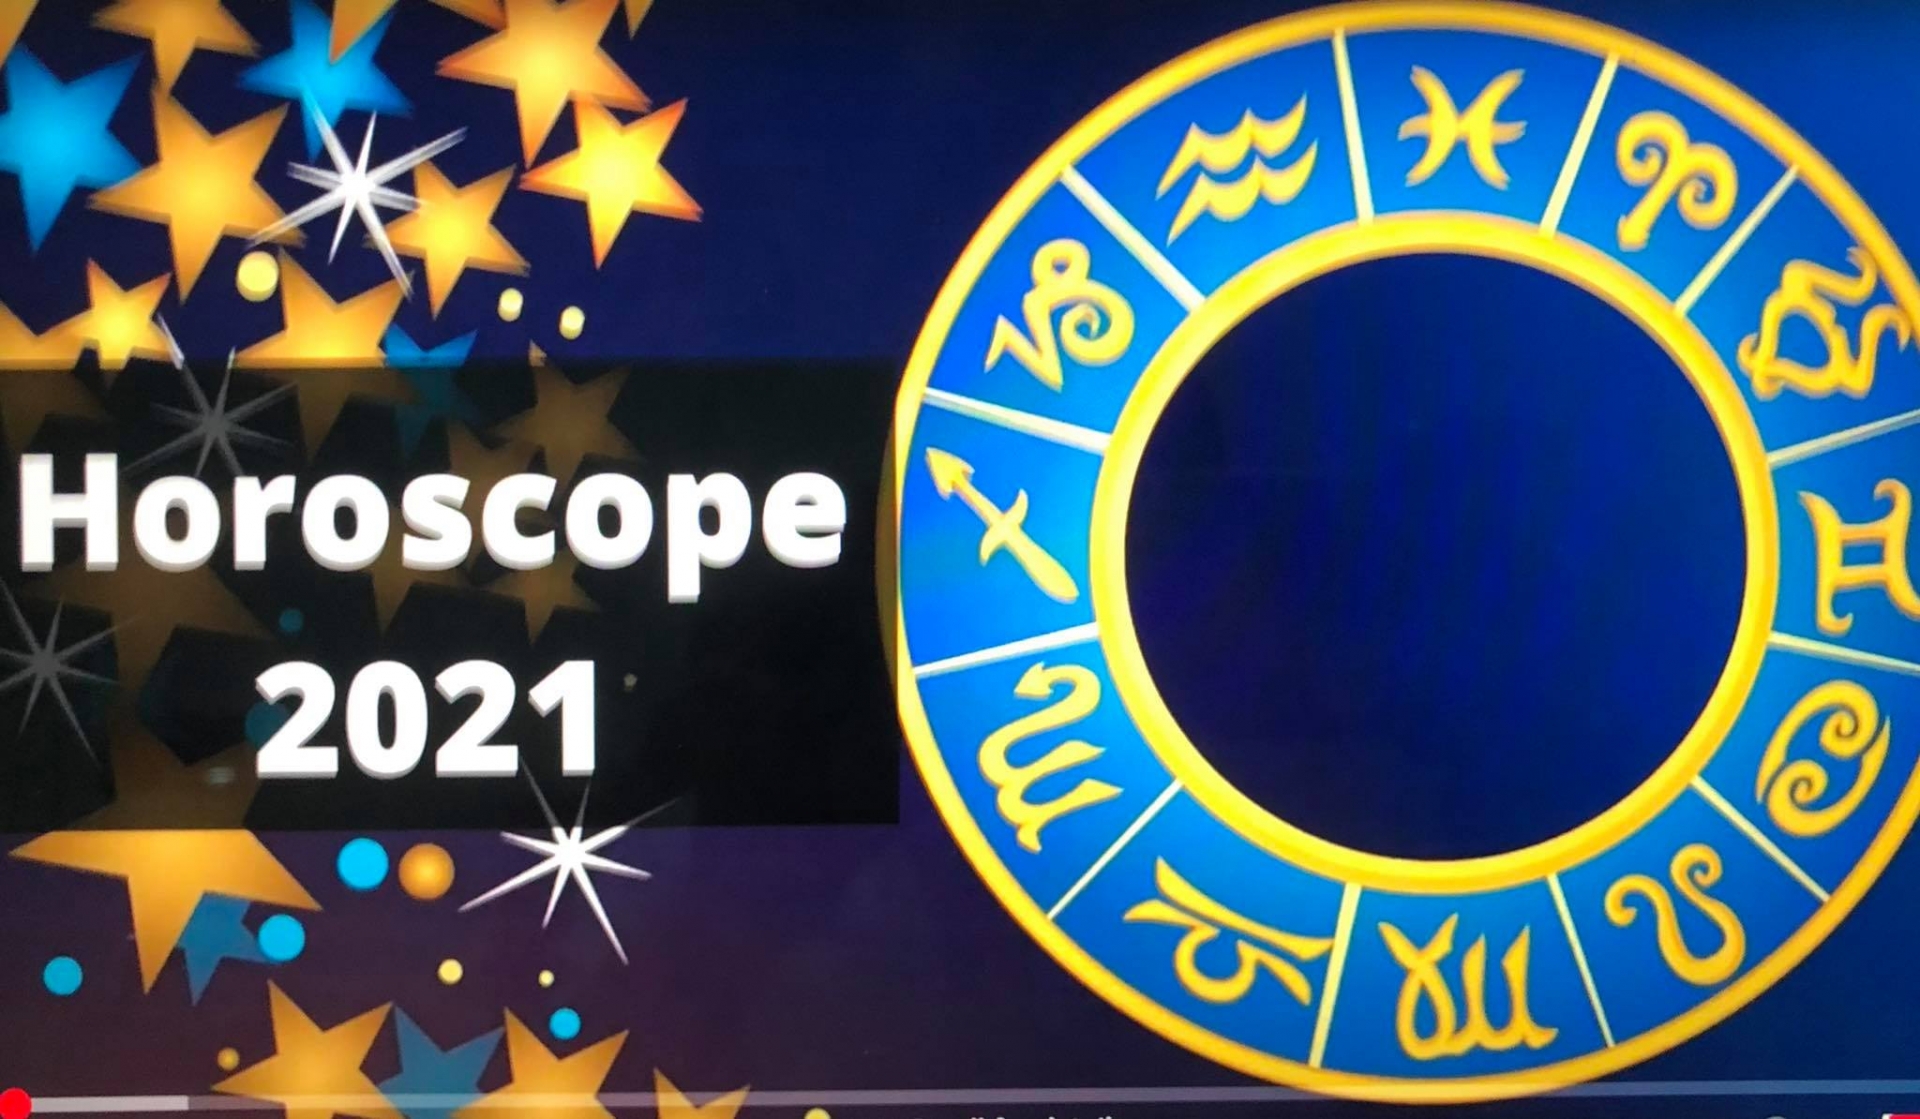 2021 Horoscopes and Astrological Prediction for all 12 Zodiac Signs in Love, Career, Money and Health